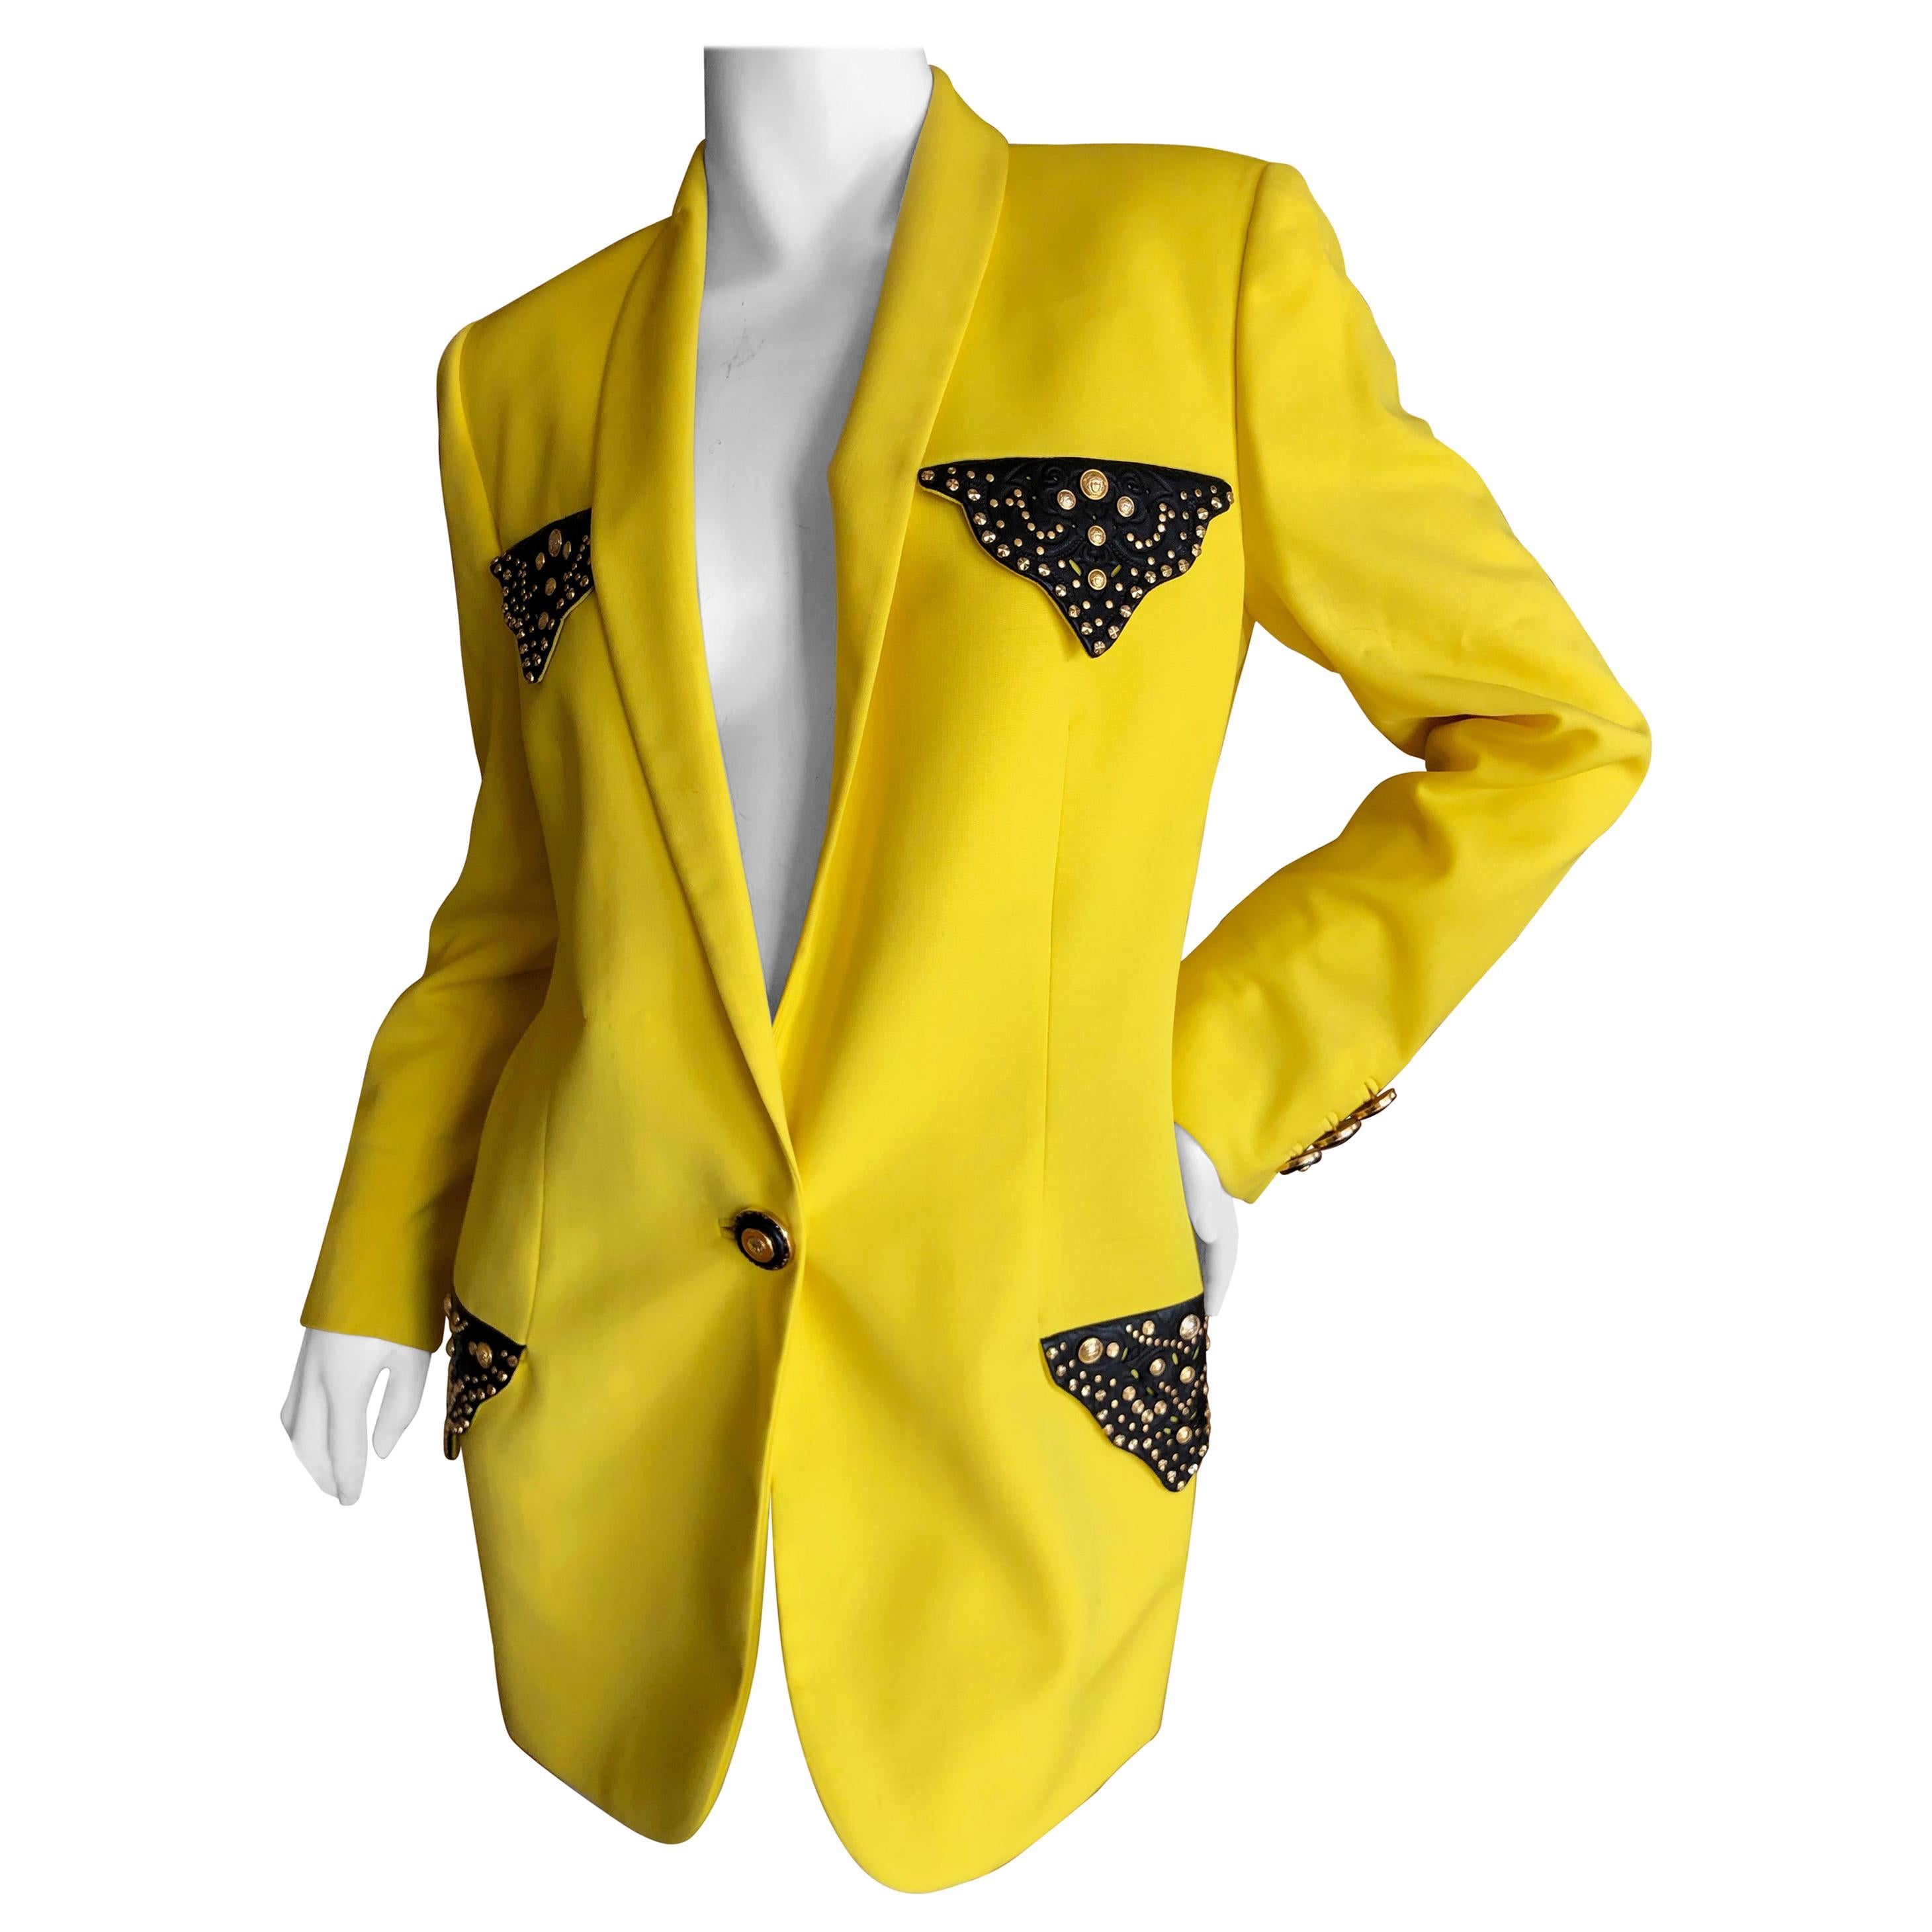 Gianni Versace Iconic Fall 1992 Screaming Yellow Jacket with Leather Details For Sale